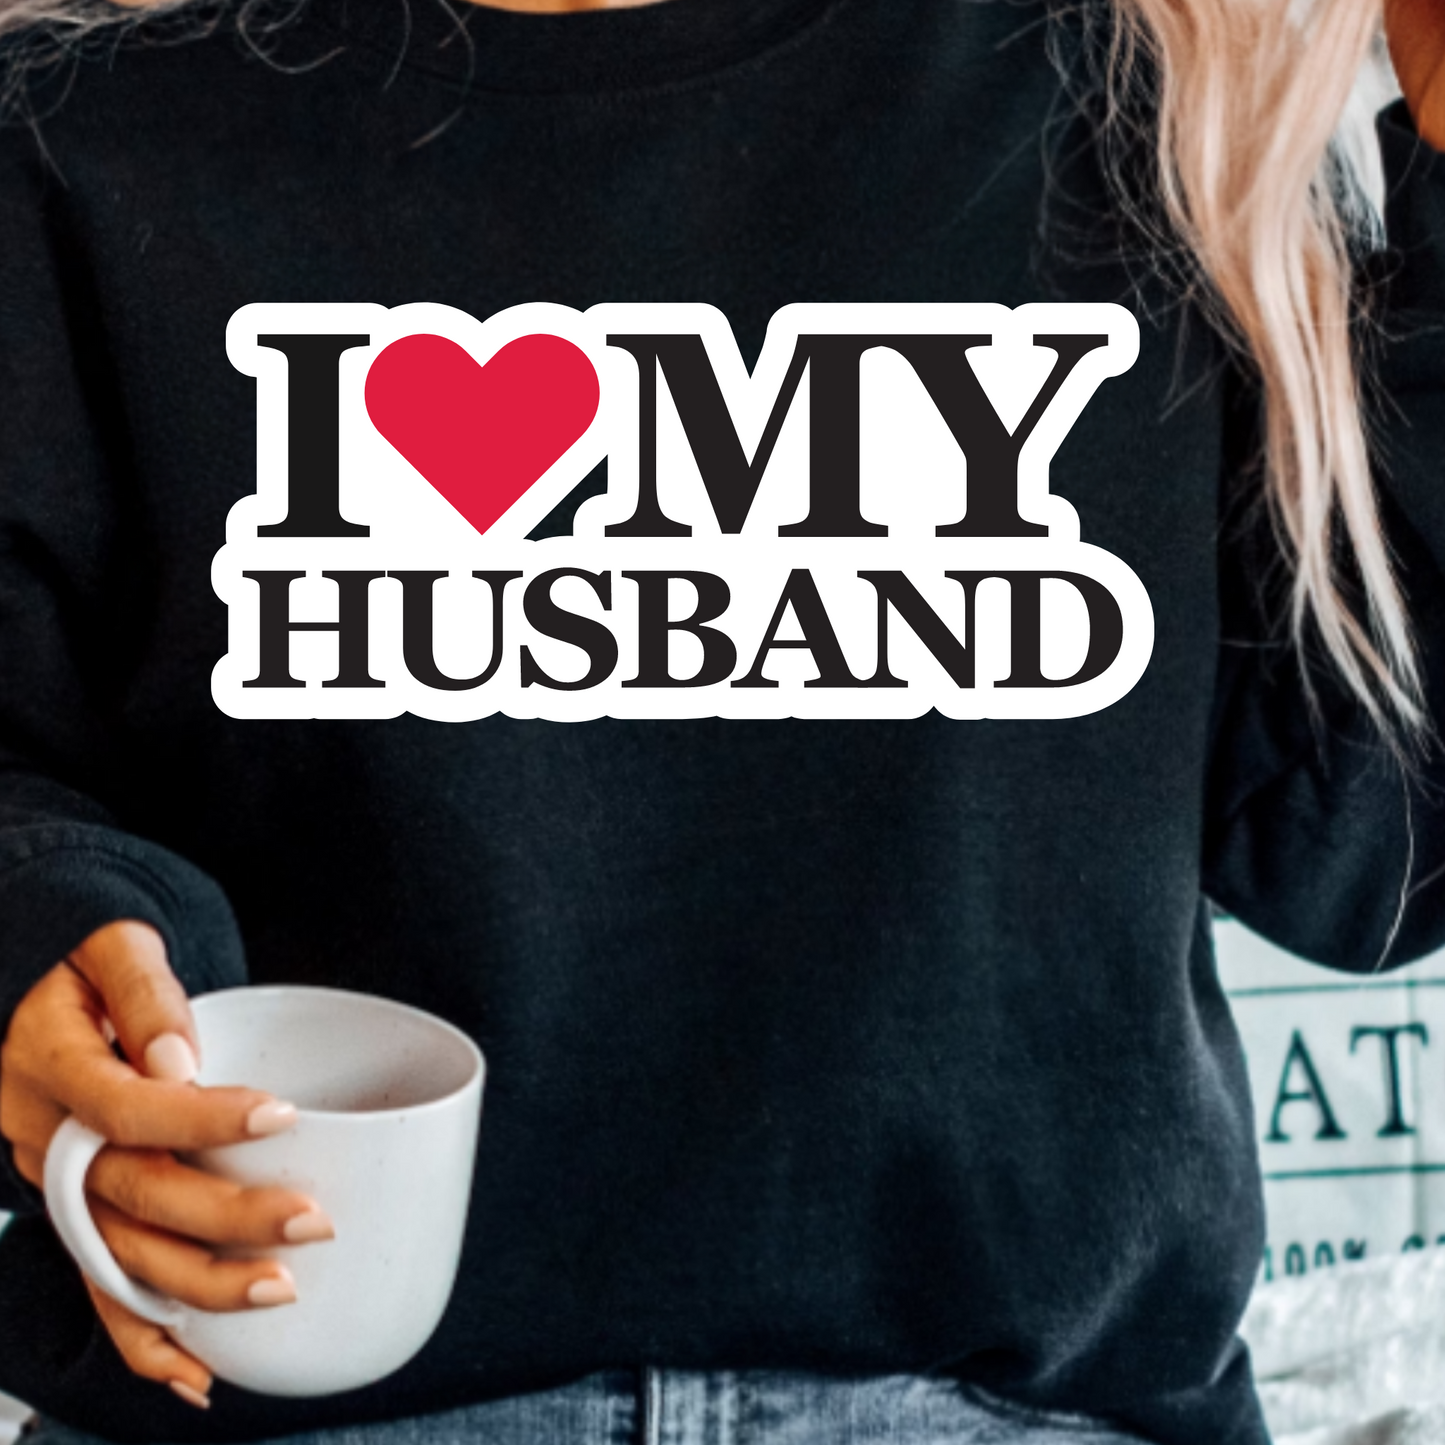 (Shirt not included) I Love my WIFE / HUSBAND-  Matte Clear Film Transfer